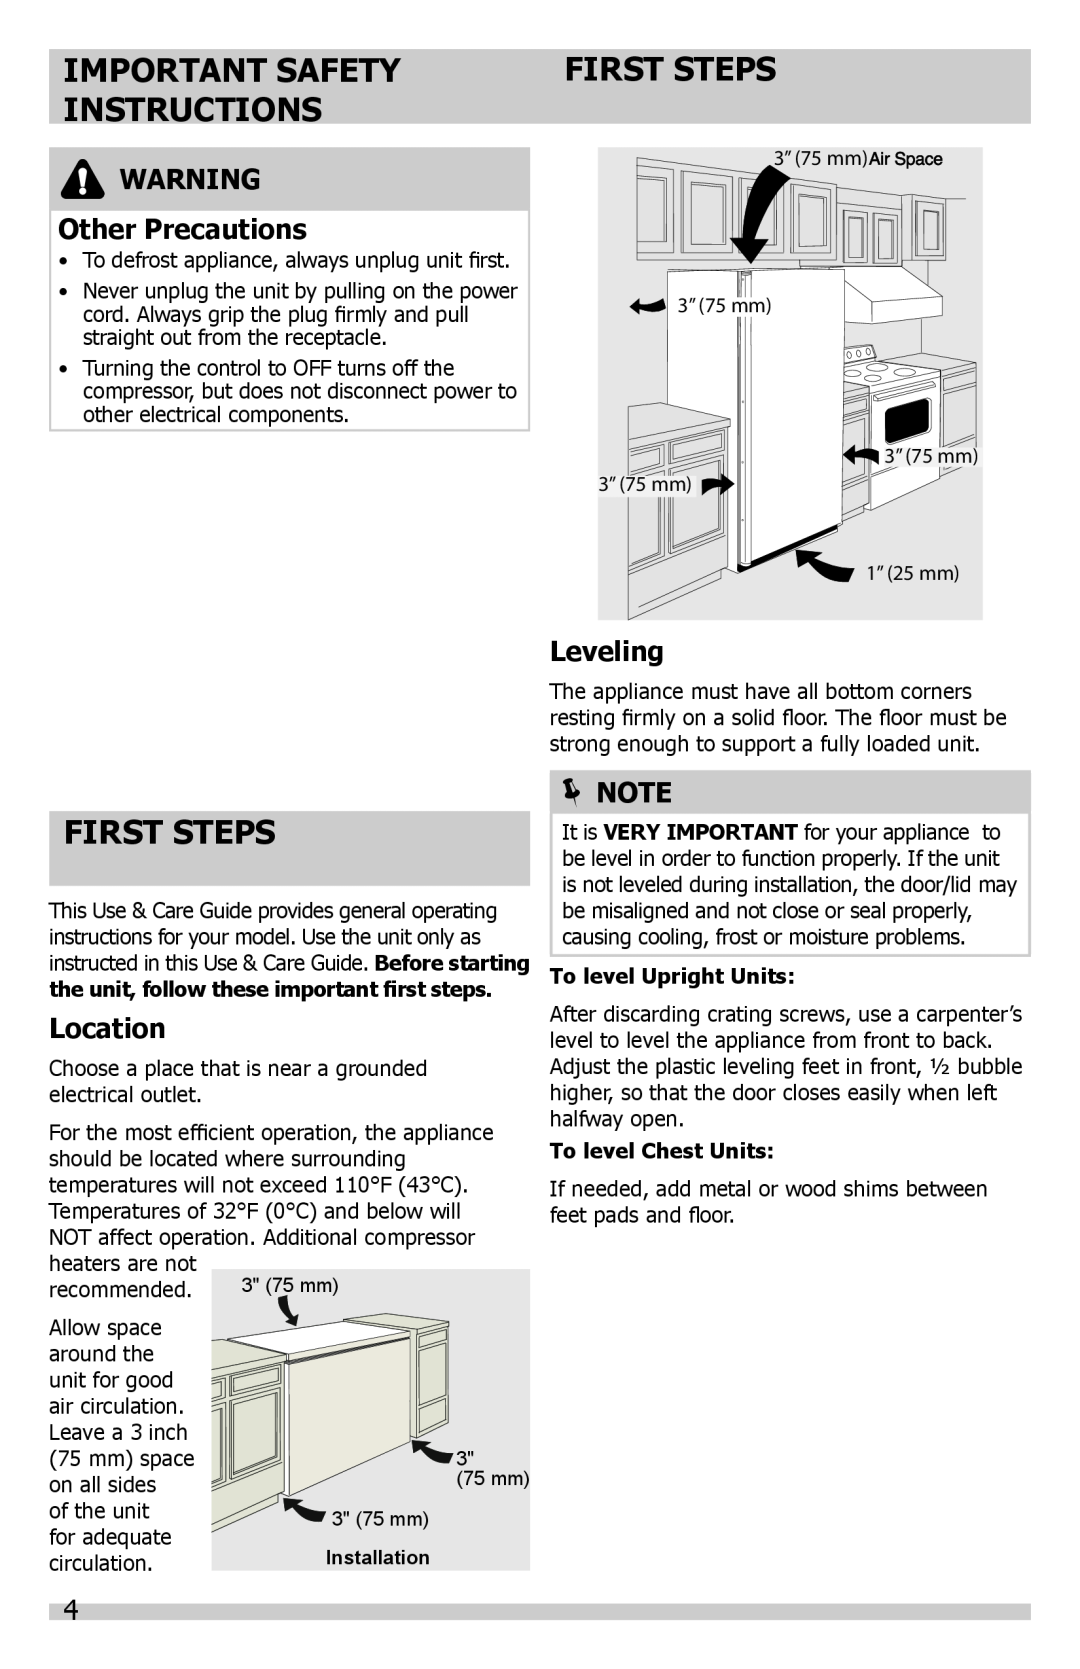 Frigidaire FFFH20F2QW, A01058501 First Steps, Other Precautions, Location, Leveling,  Note, Important Safety Instructions 